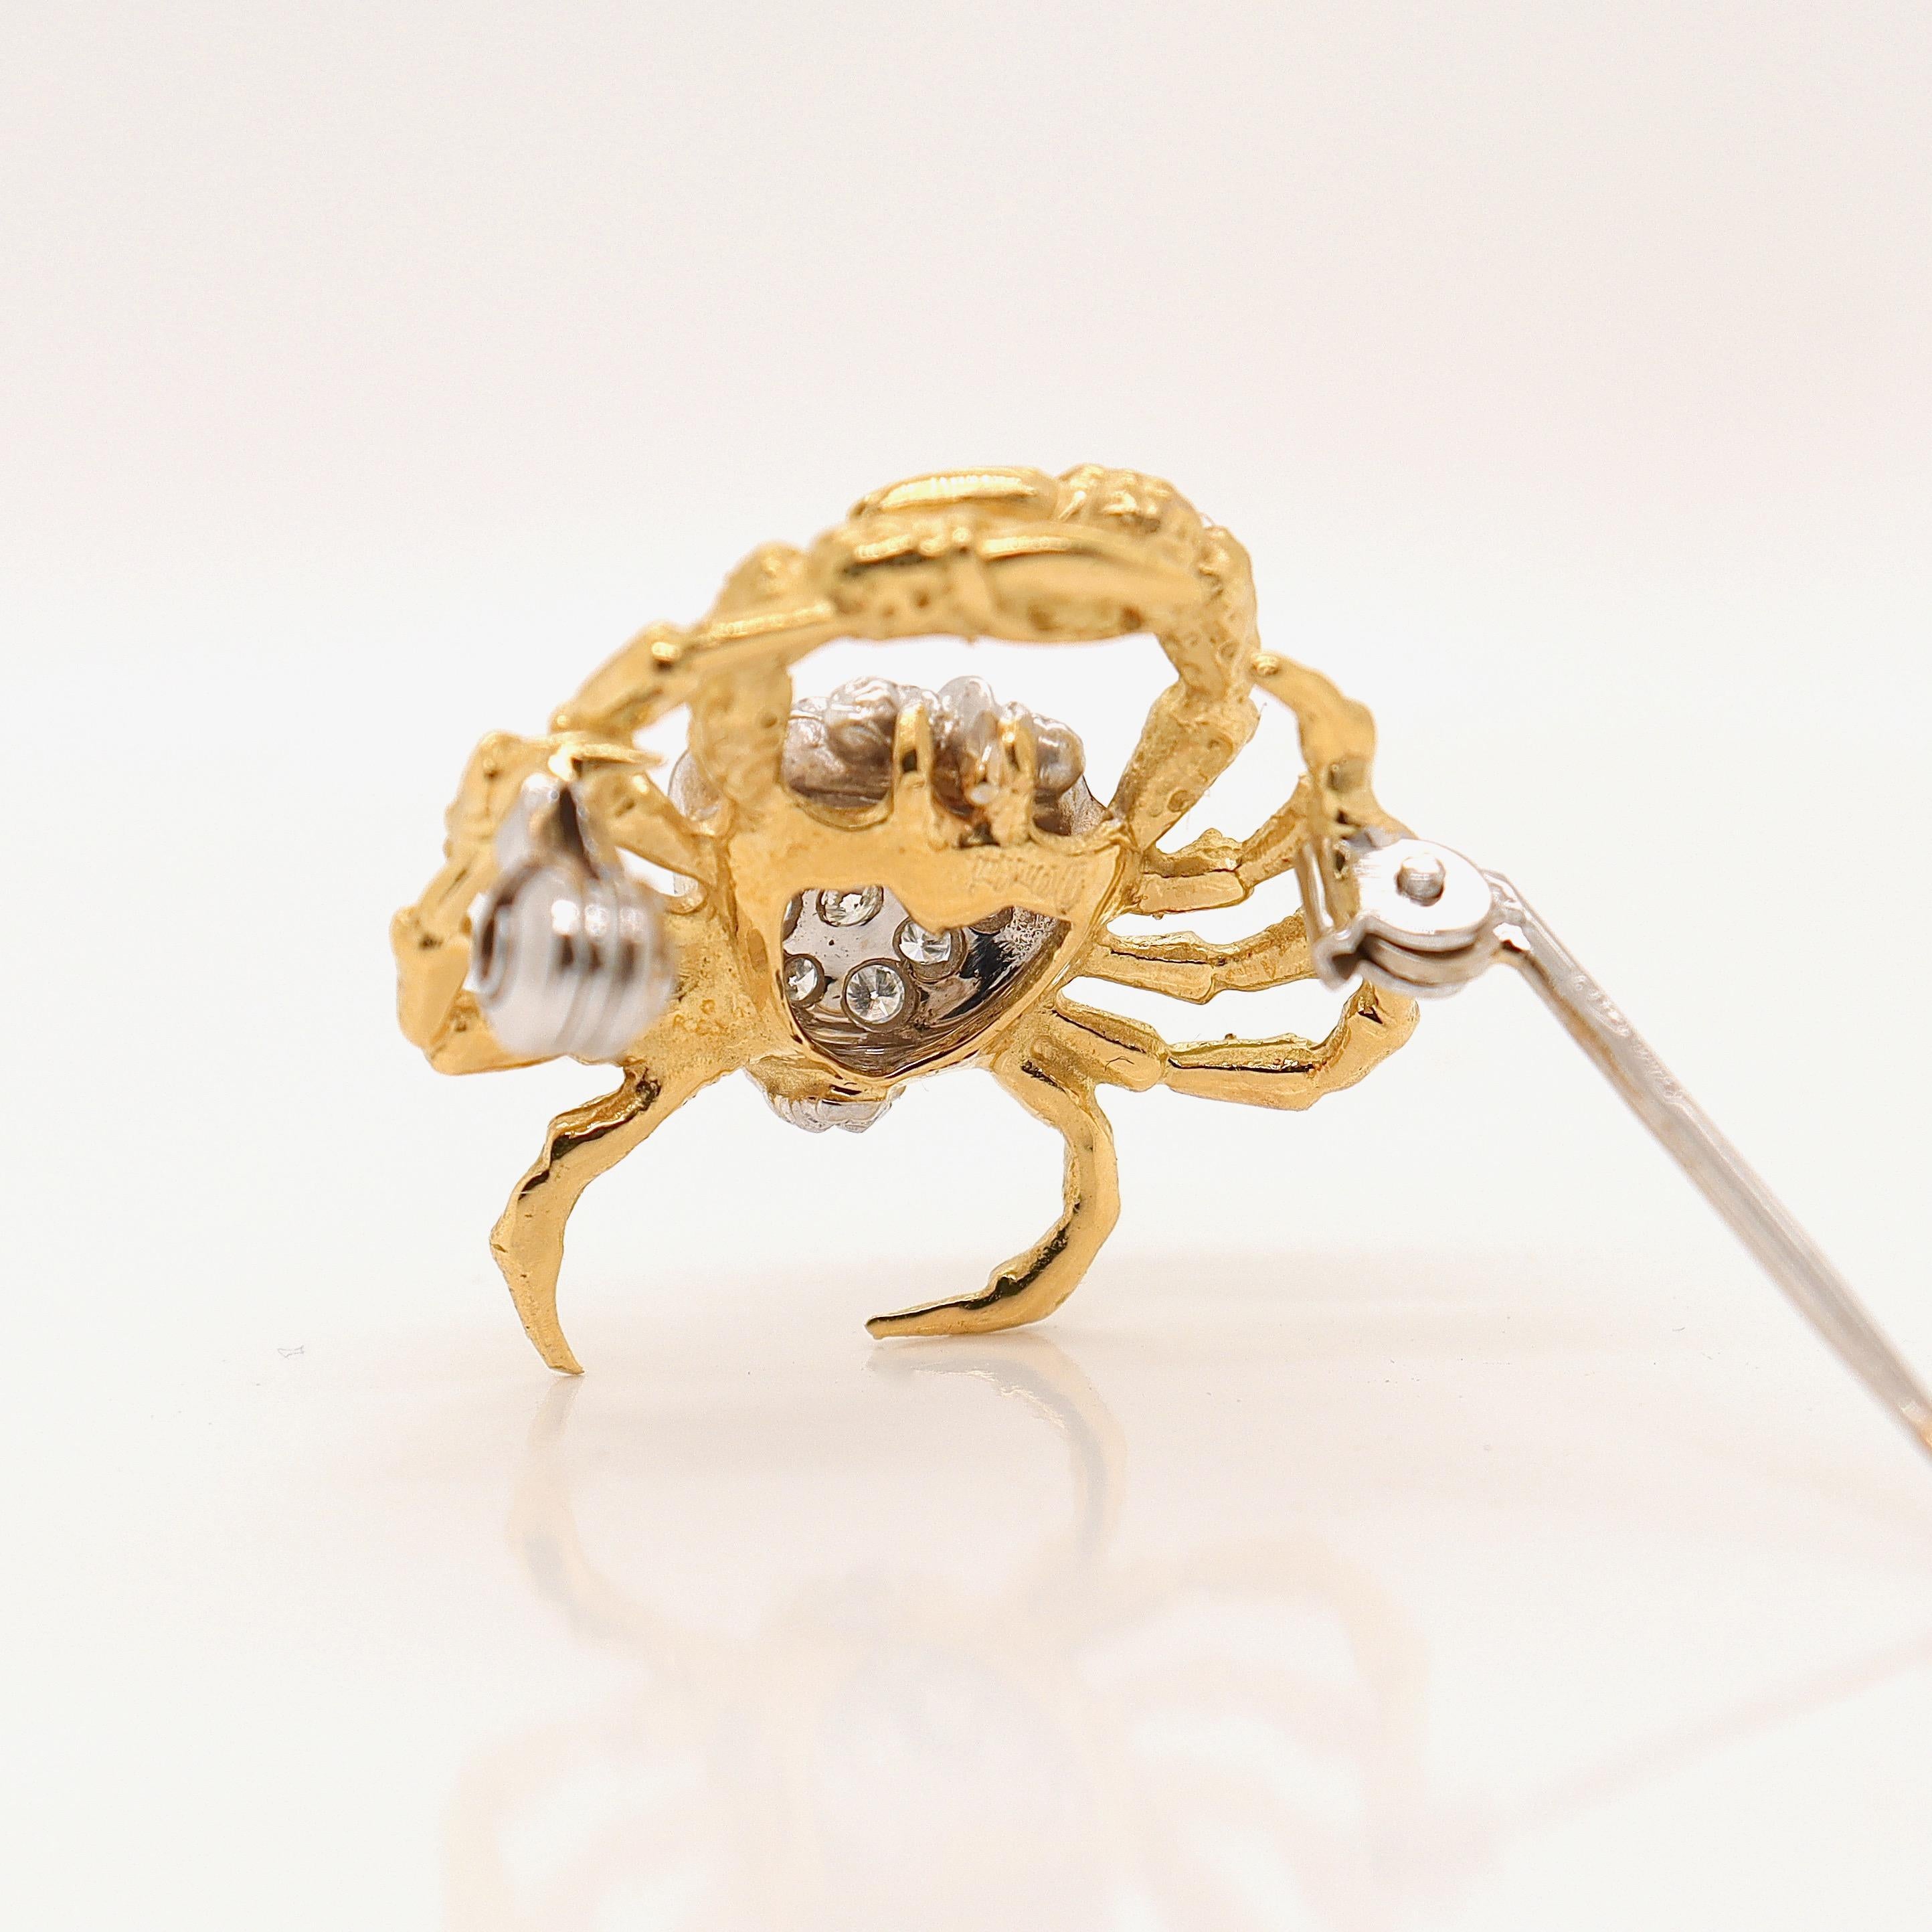 Signed Damiani 18k Gold & Diamond Crab Shaped Brooch or Pin  For Sale 11